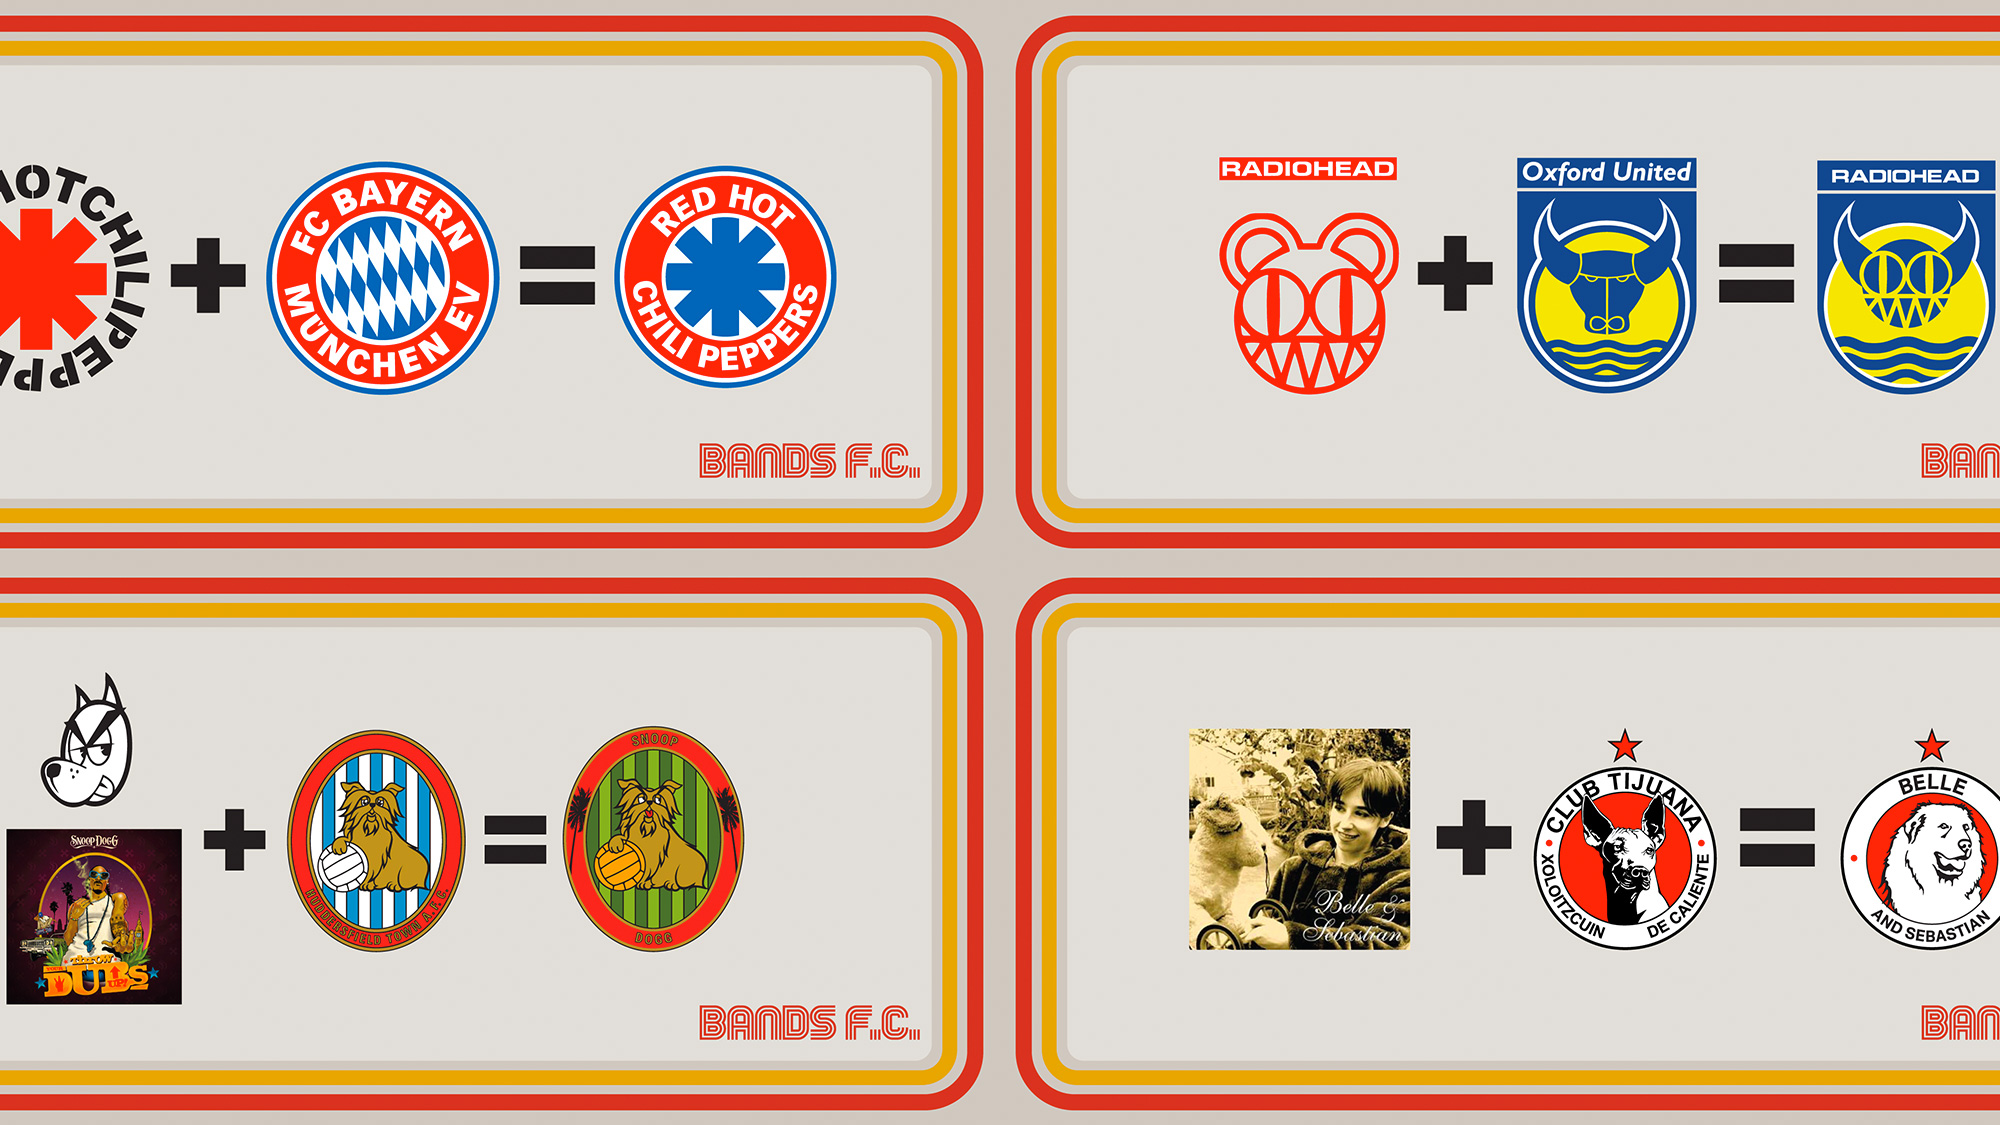 Musicians as Football Crests